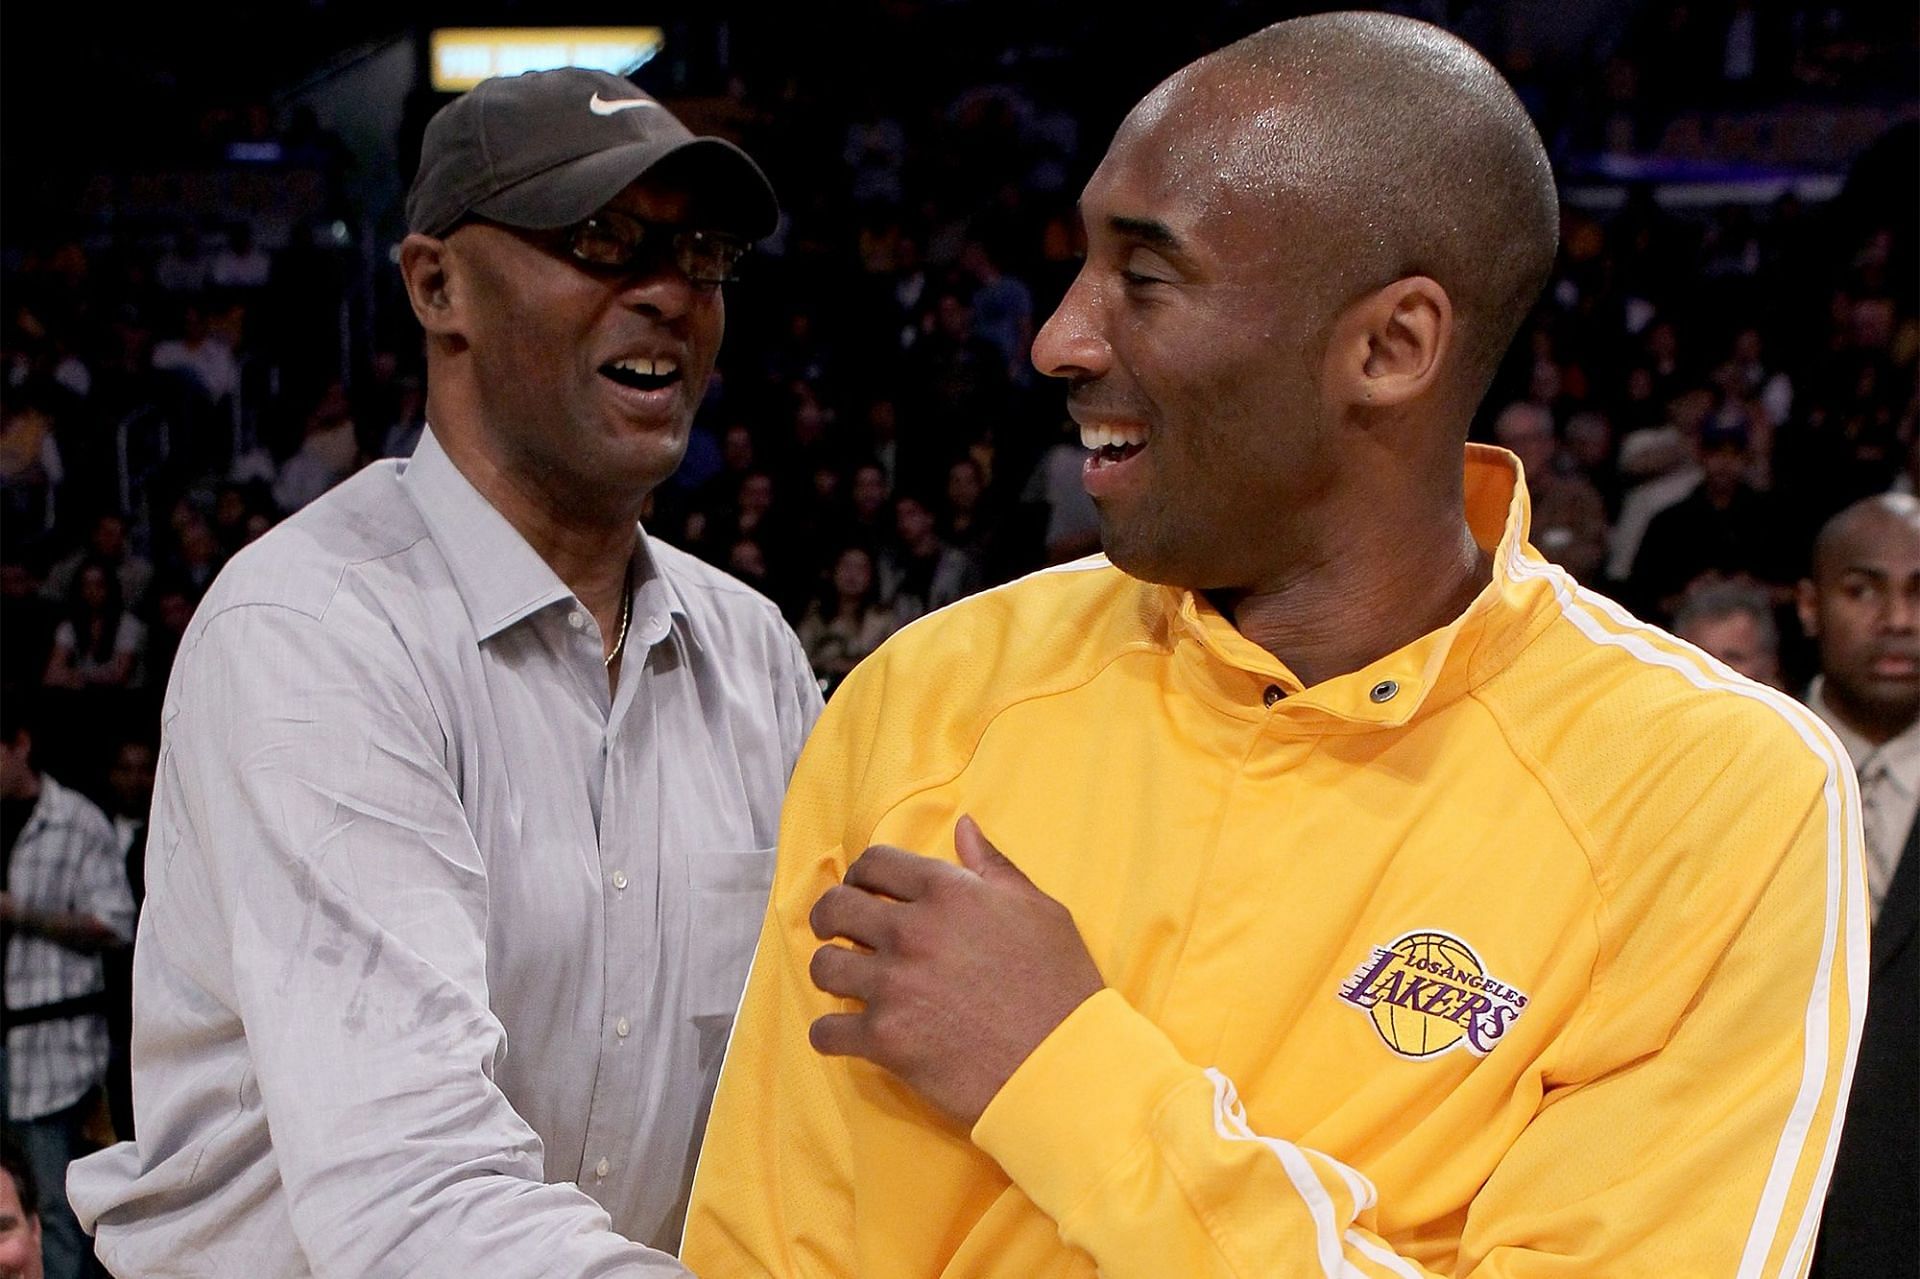 The late Kobe Bryant and his father, Joe Bryant, used to spend a part of their winter watching soccer in Italy. [Photo: New York Post]